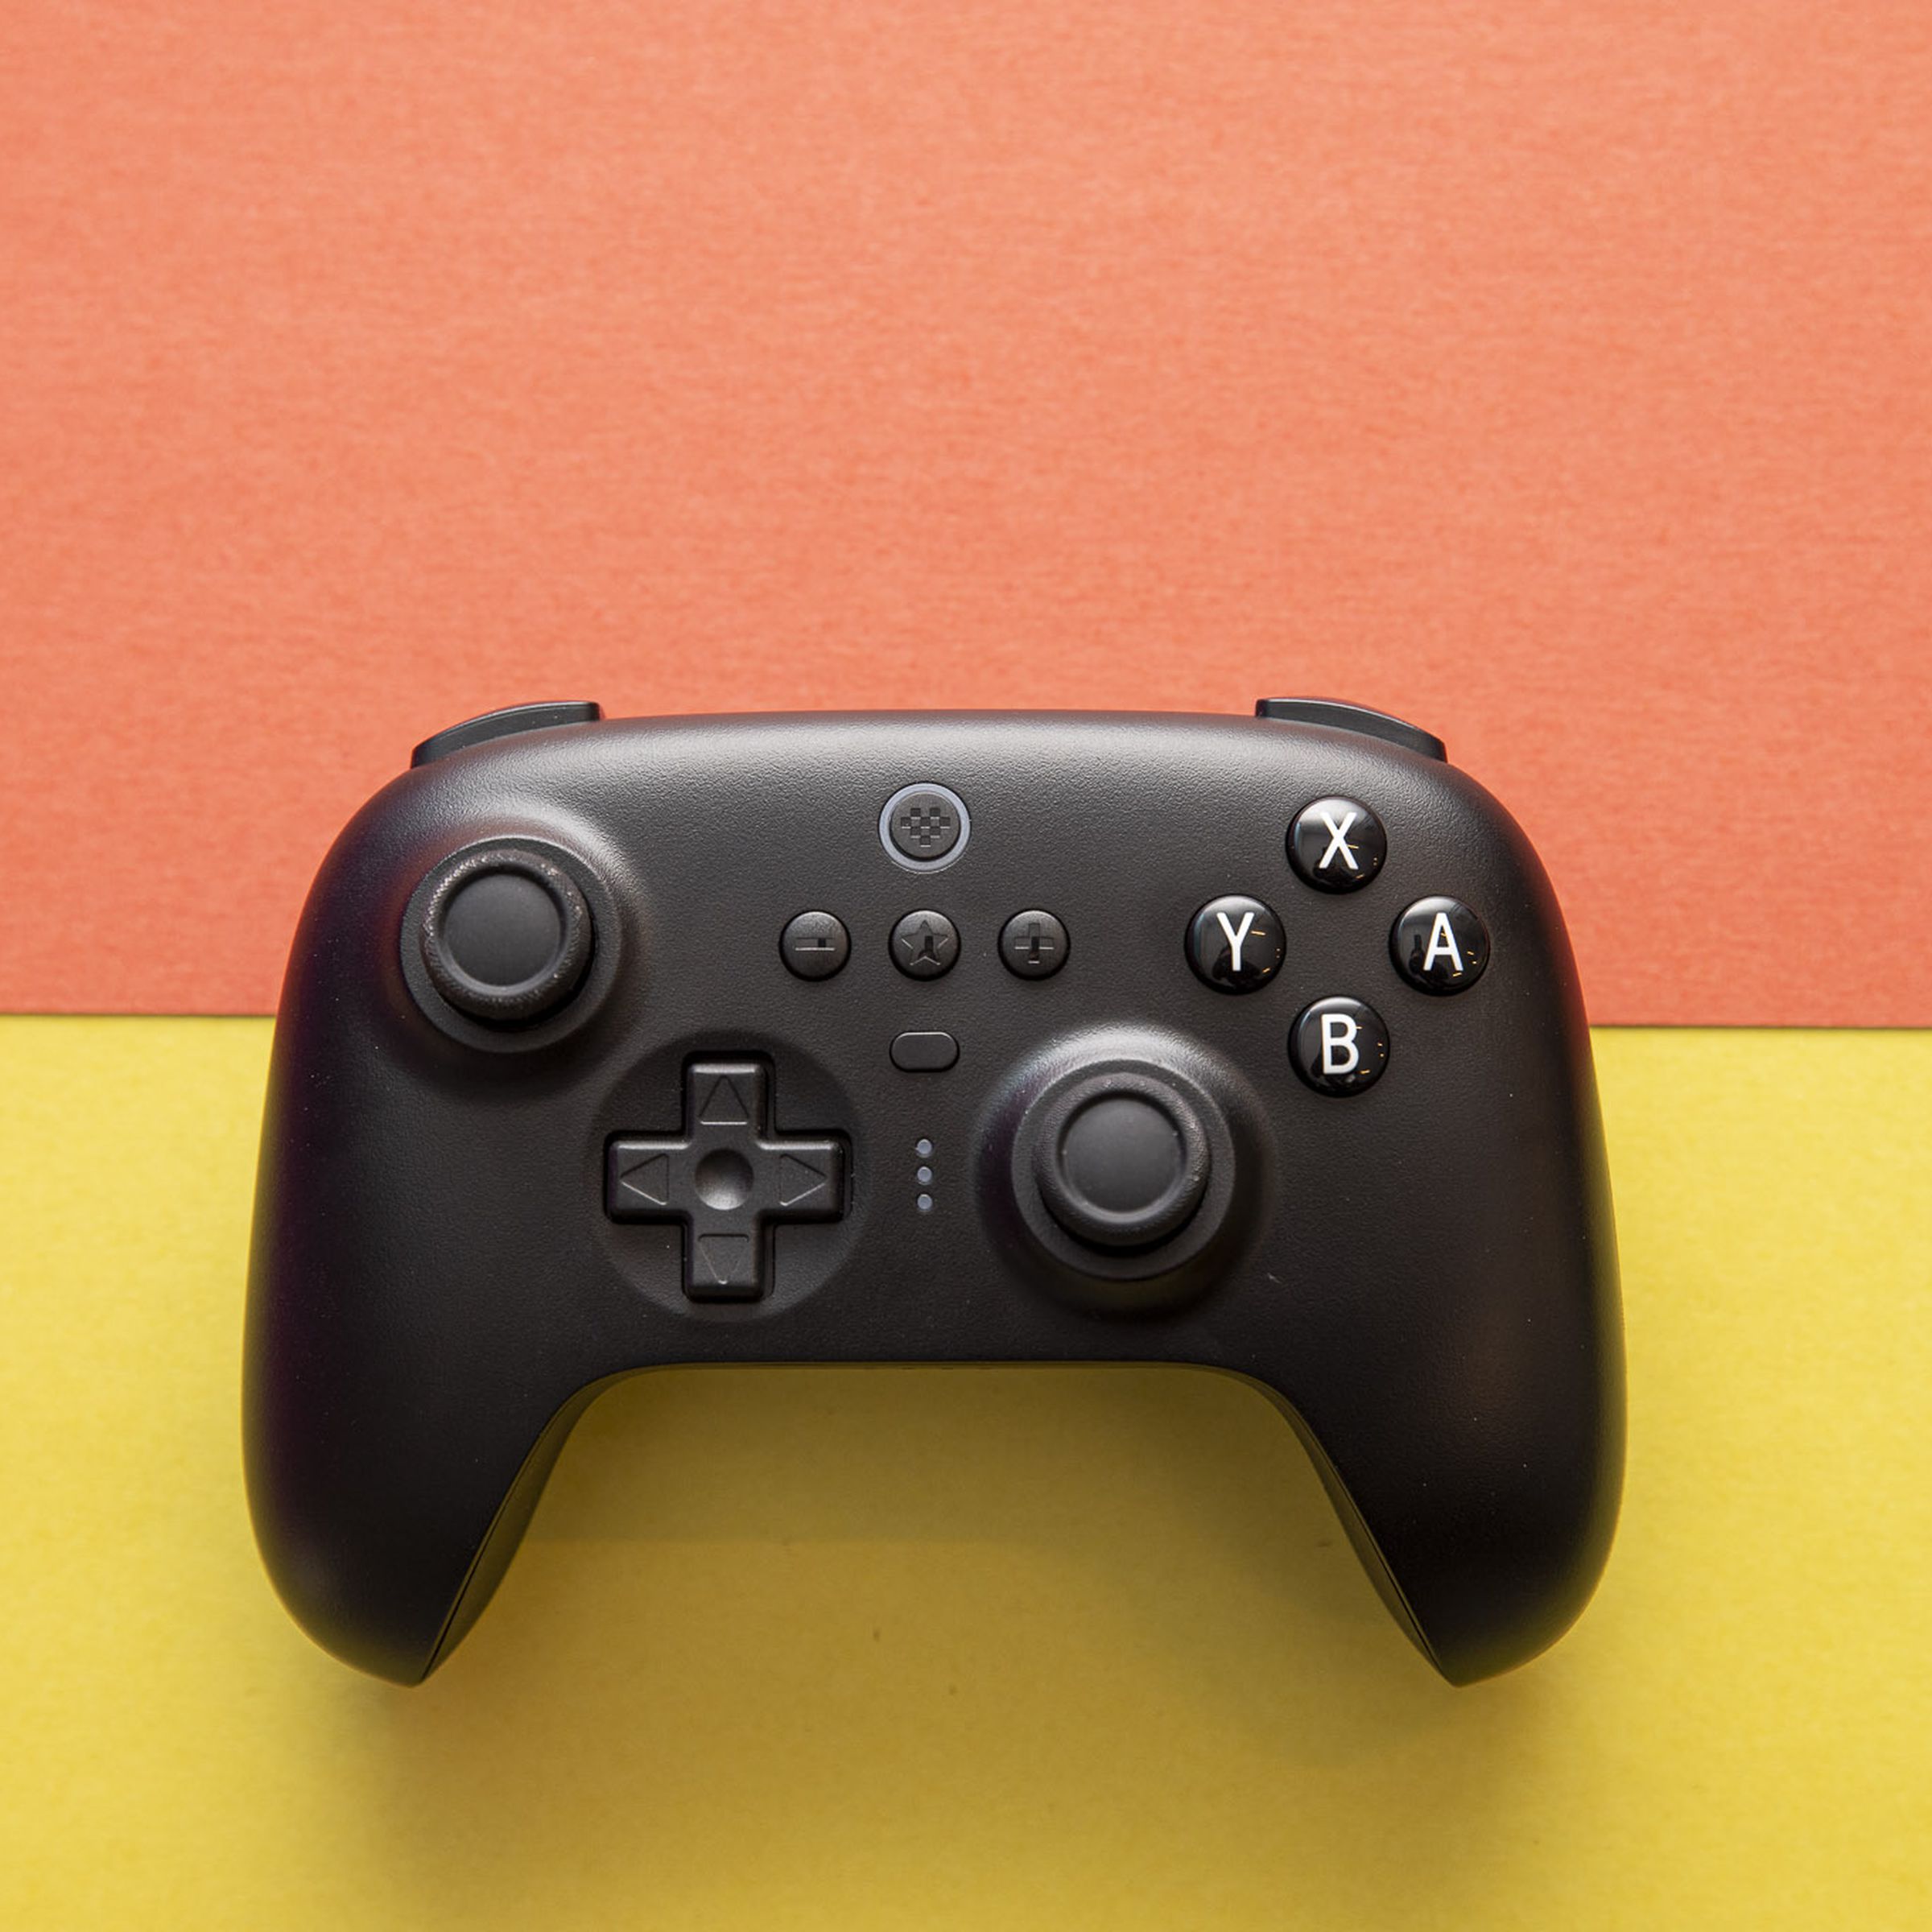 Top-down shot of 8BitDo Ultimate Controller on an orange and yellow background. The controller has an asymmetric joystick design, like an Xbox or Switch Pro controller, and it’s black, with white legends on the A B X Y buttons.